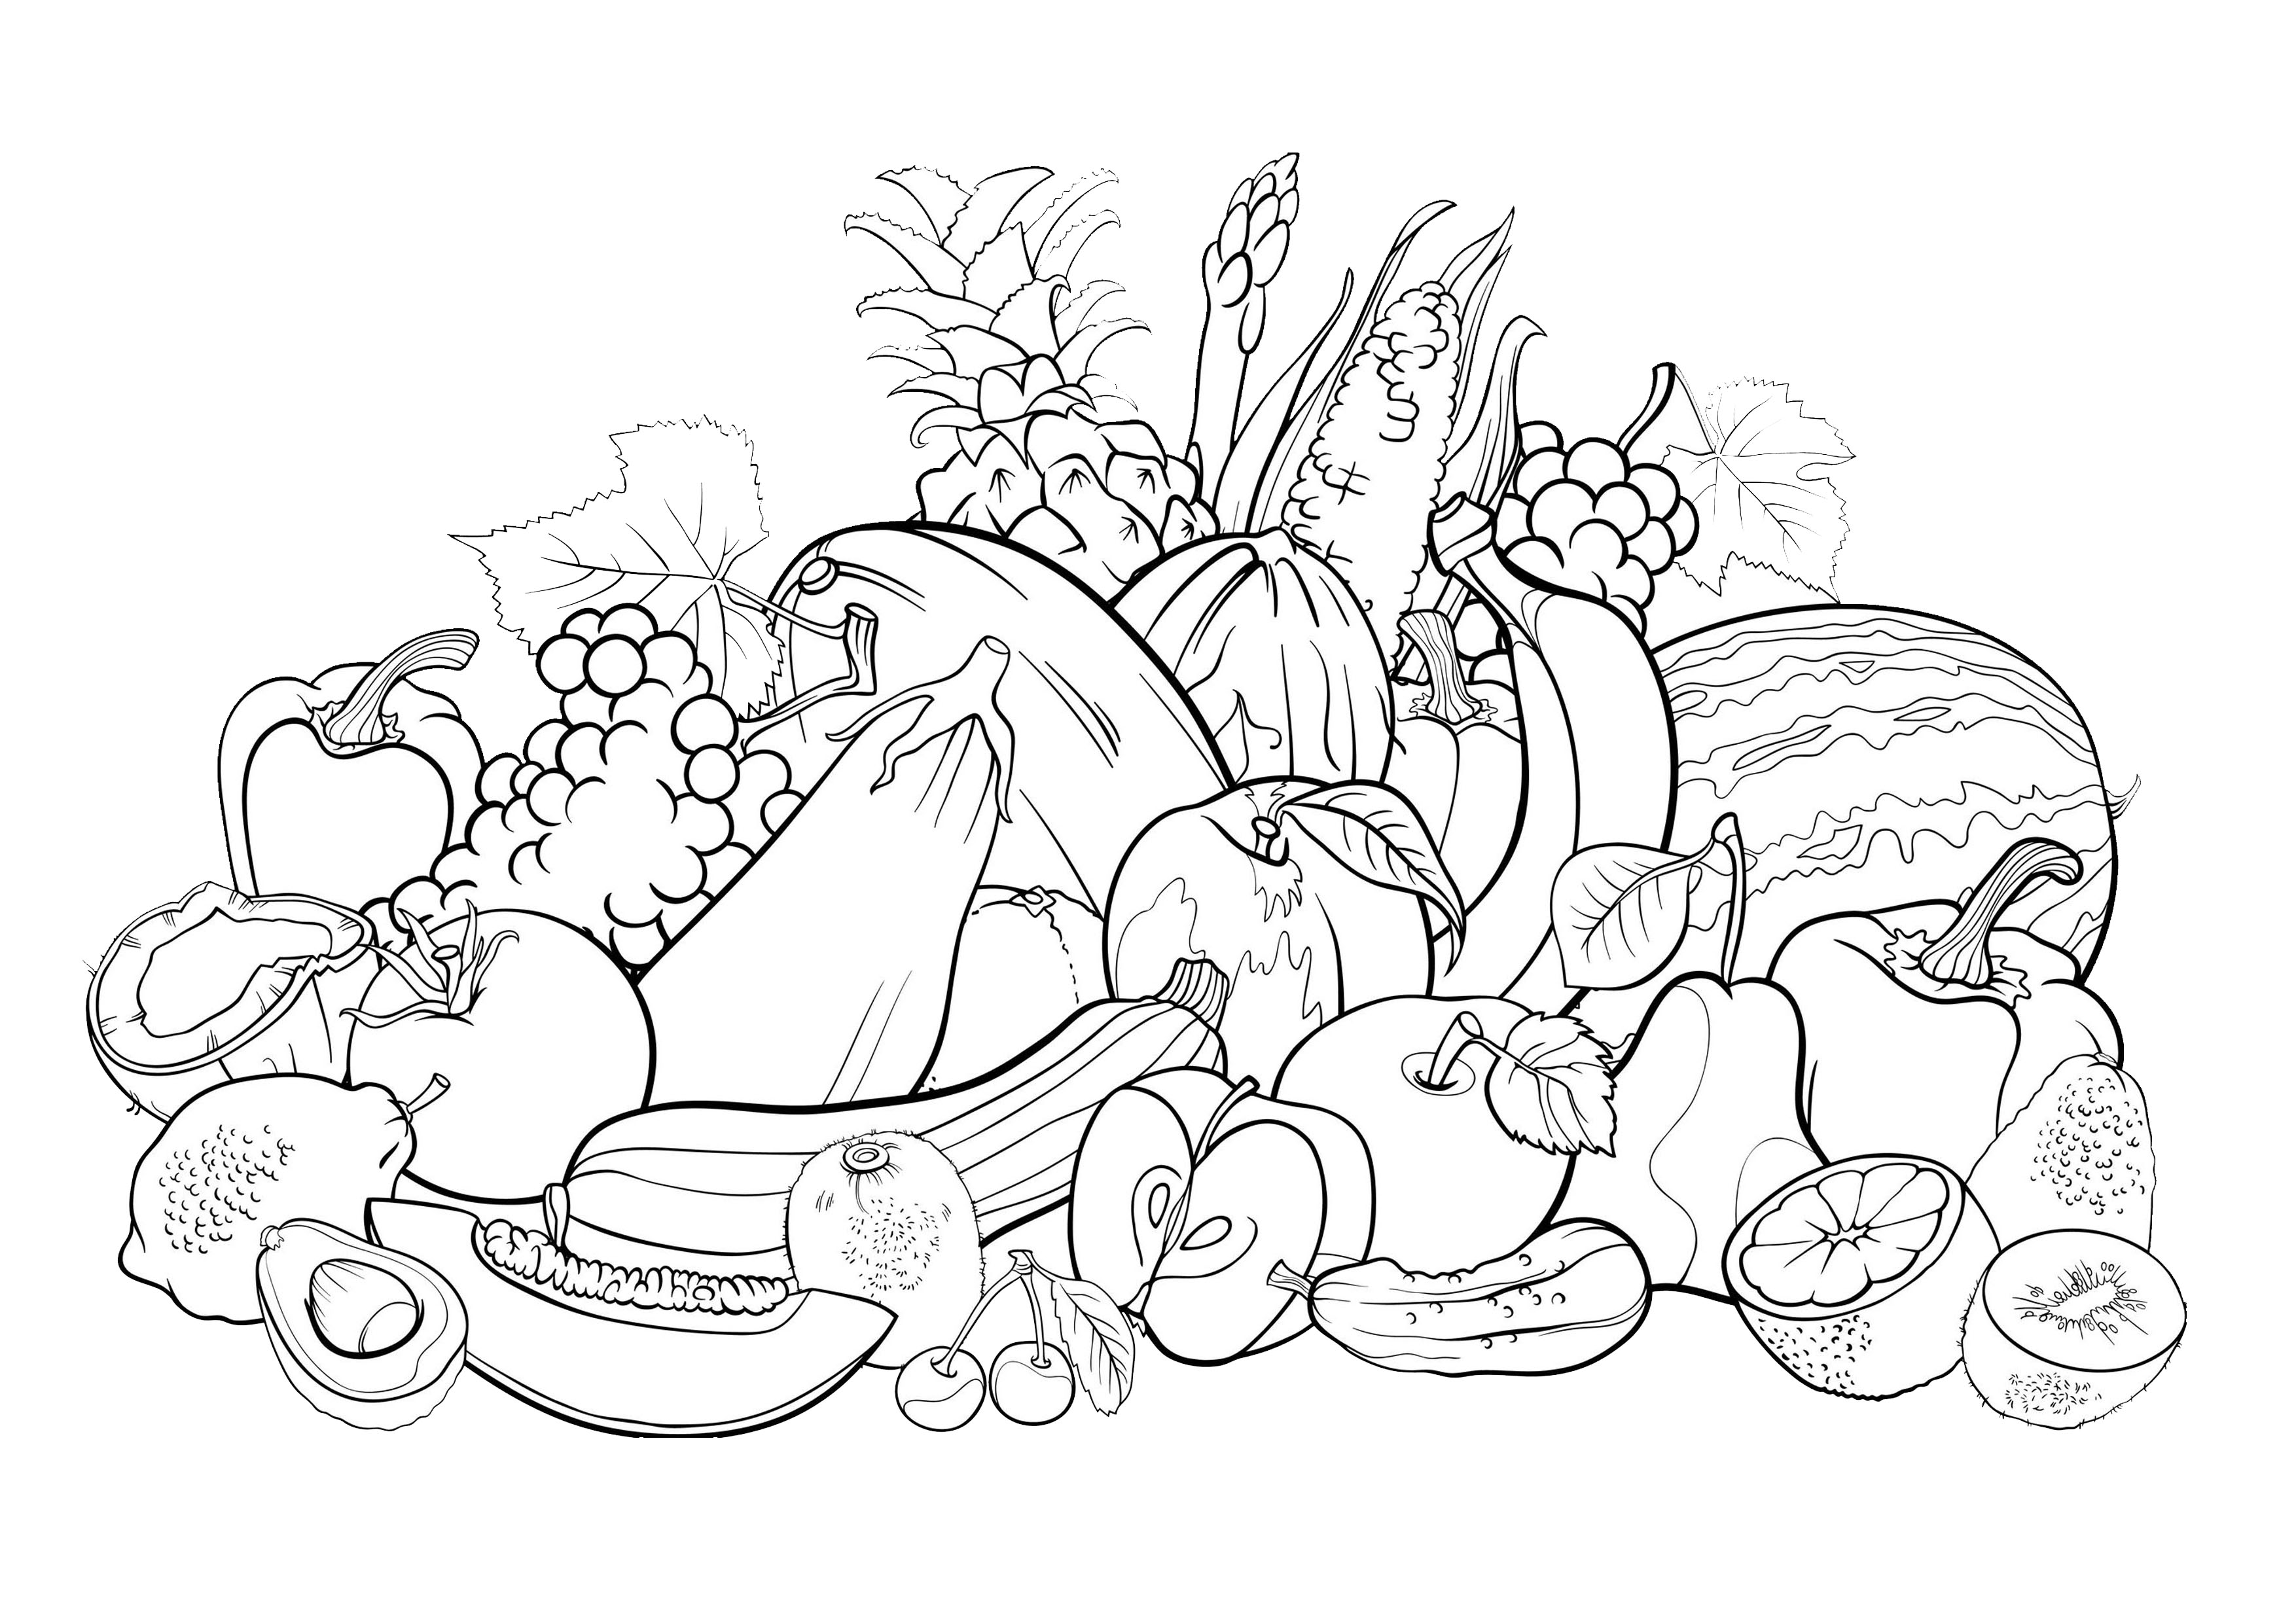 Download Fruit salad - Flowers Adult Coloring Pages